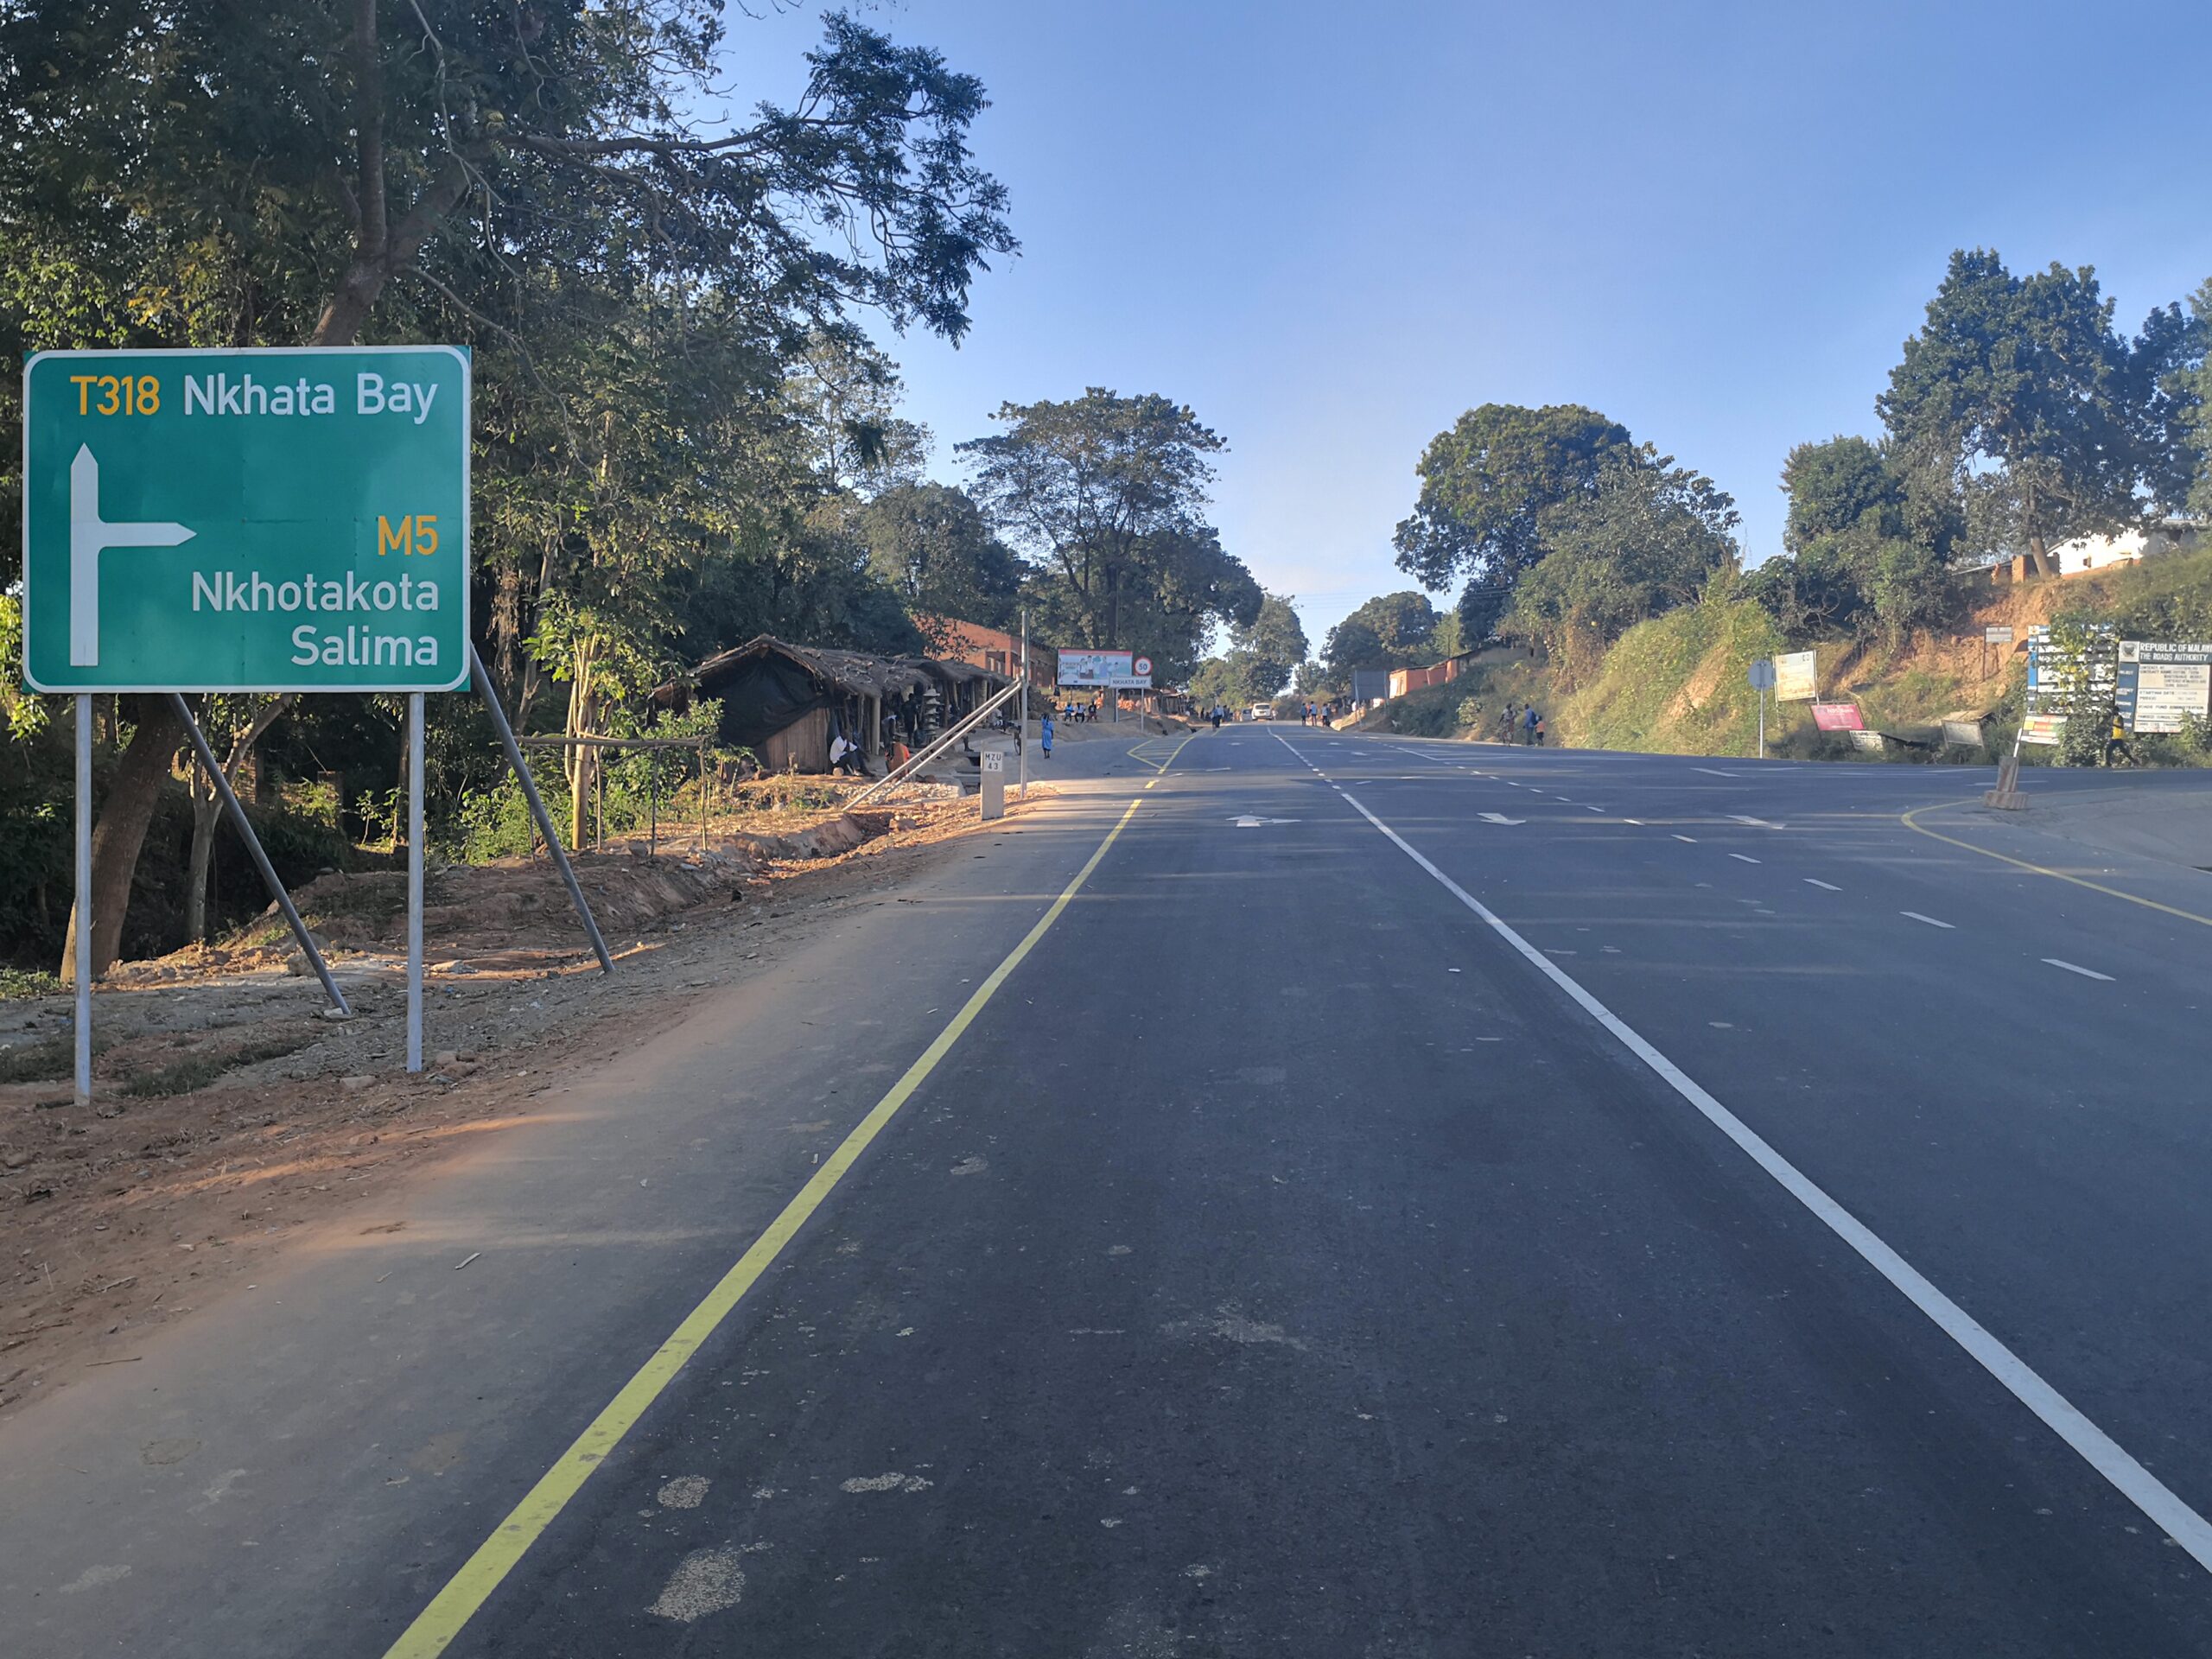 Malawi The Mzuzu Nkhata Bay Road Now Among The Country s Safest Roads Thanks To African